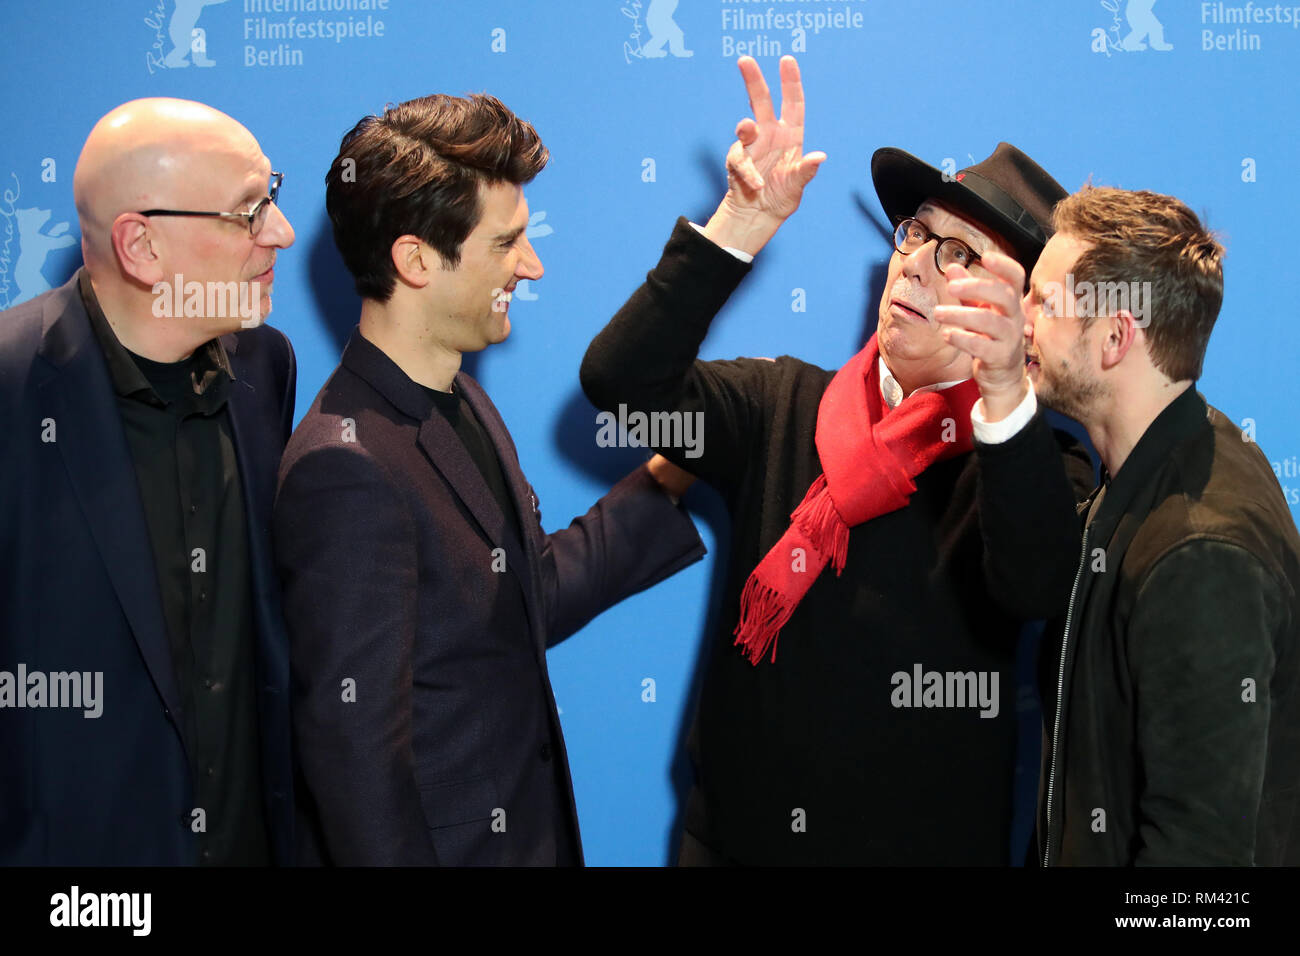 Berlin, Germany. 11th Feb, 2019. 69th Berlinale, Photocall 'Skin', USA, Panorama: Oren Moverman, producer (l-r), Guy Nattiv, director and screenwriter, Berlinale director Dieter Kosslick and Jamie Bell, British actor. Credit: Christof Soeder/dpa/Alamy Live News Stock Photo